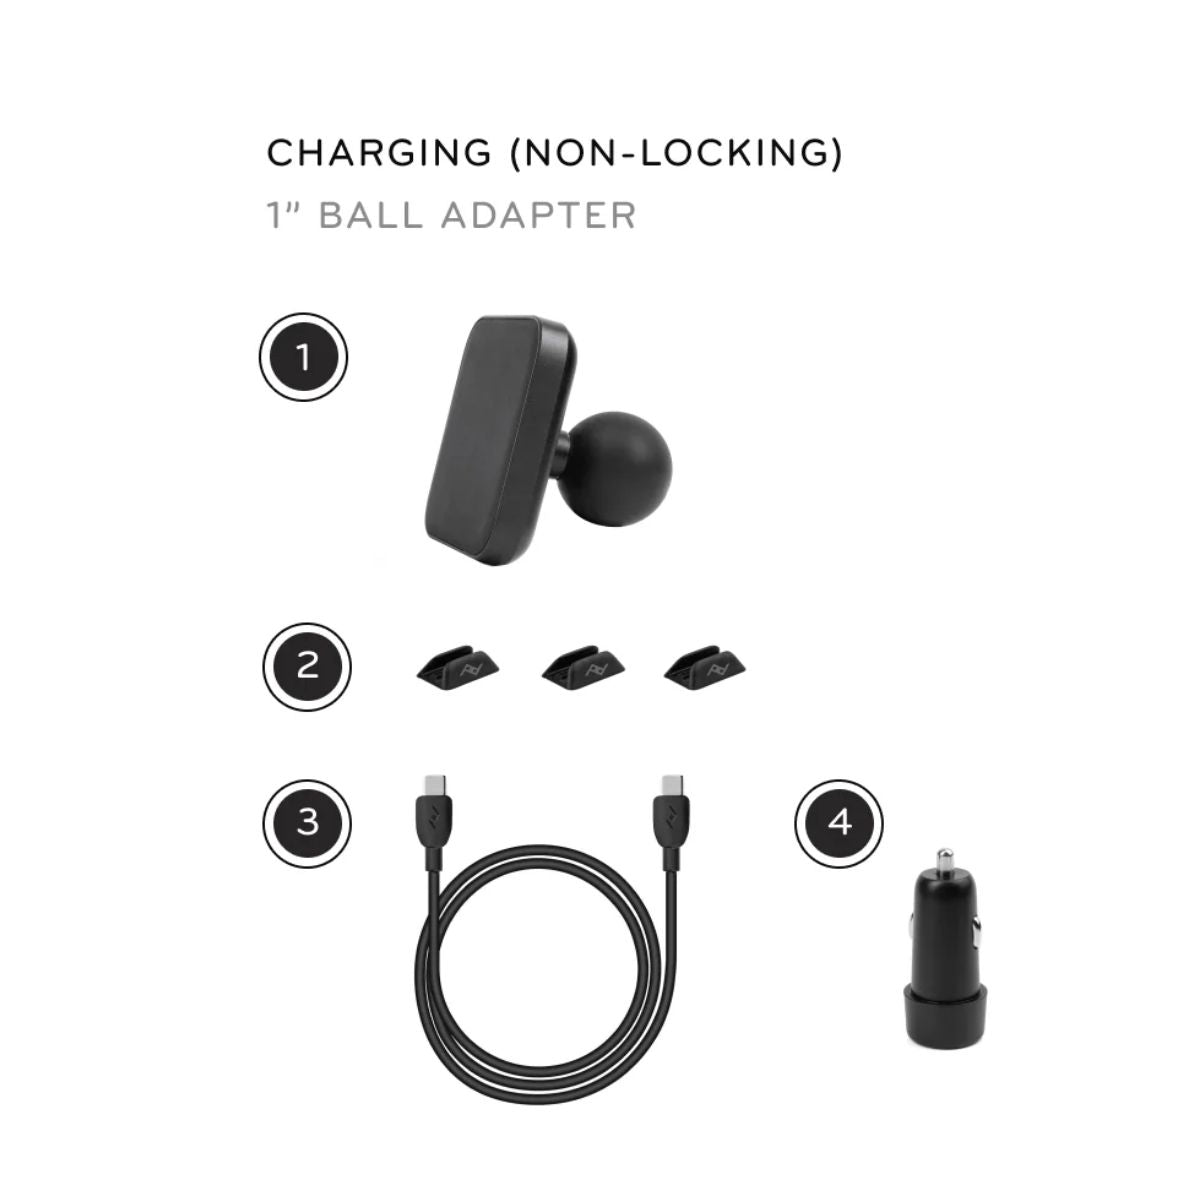 1 inch Ball Mount Adapter for Car - Charging Model 10